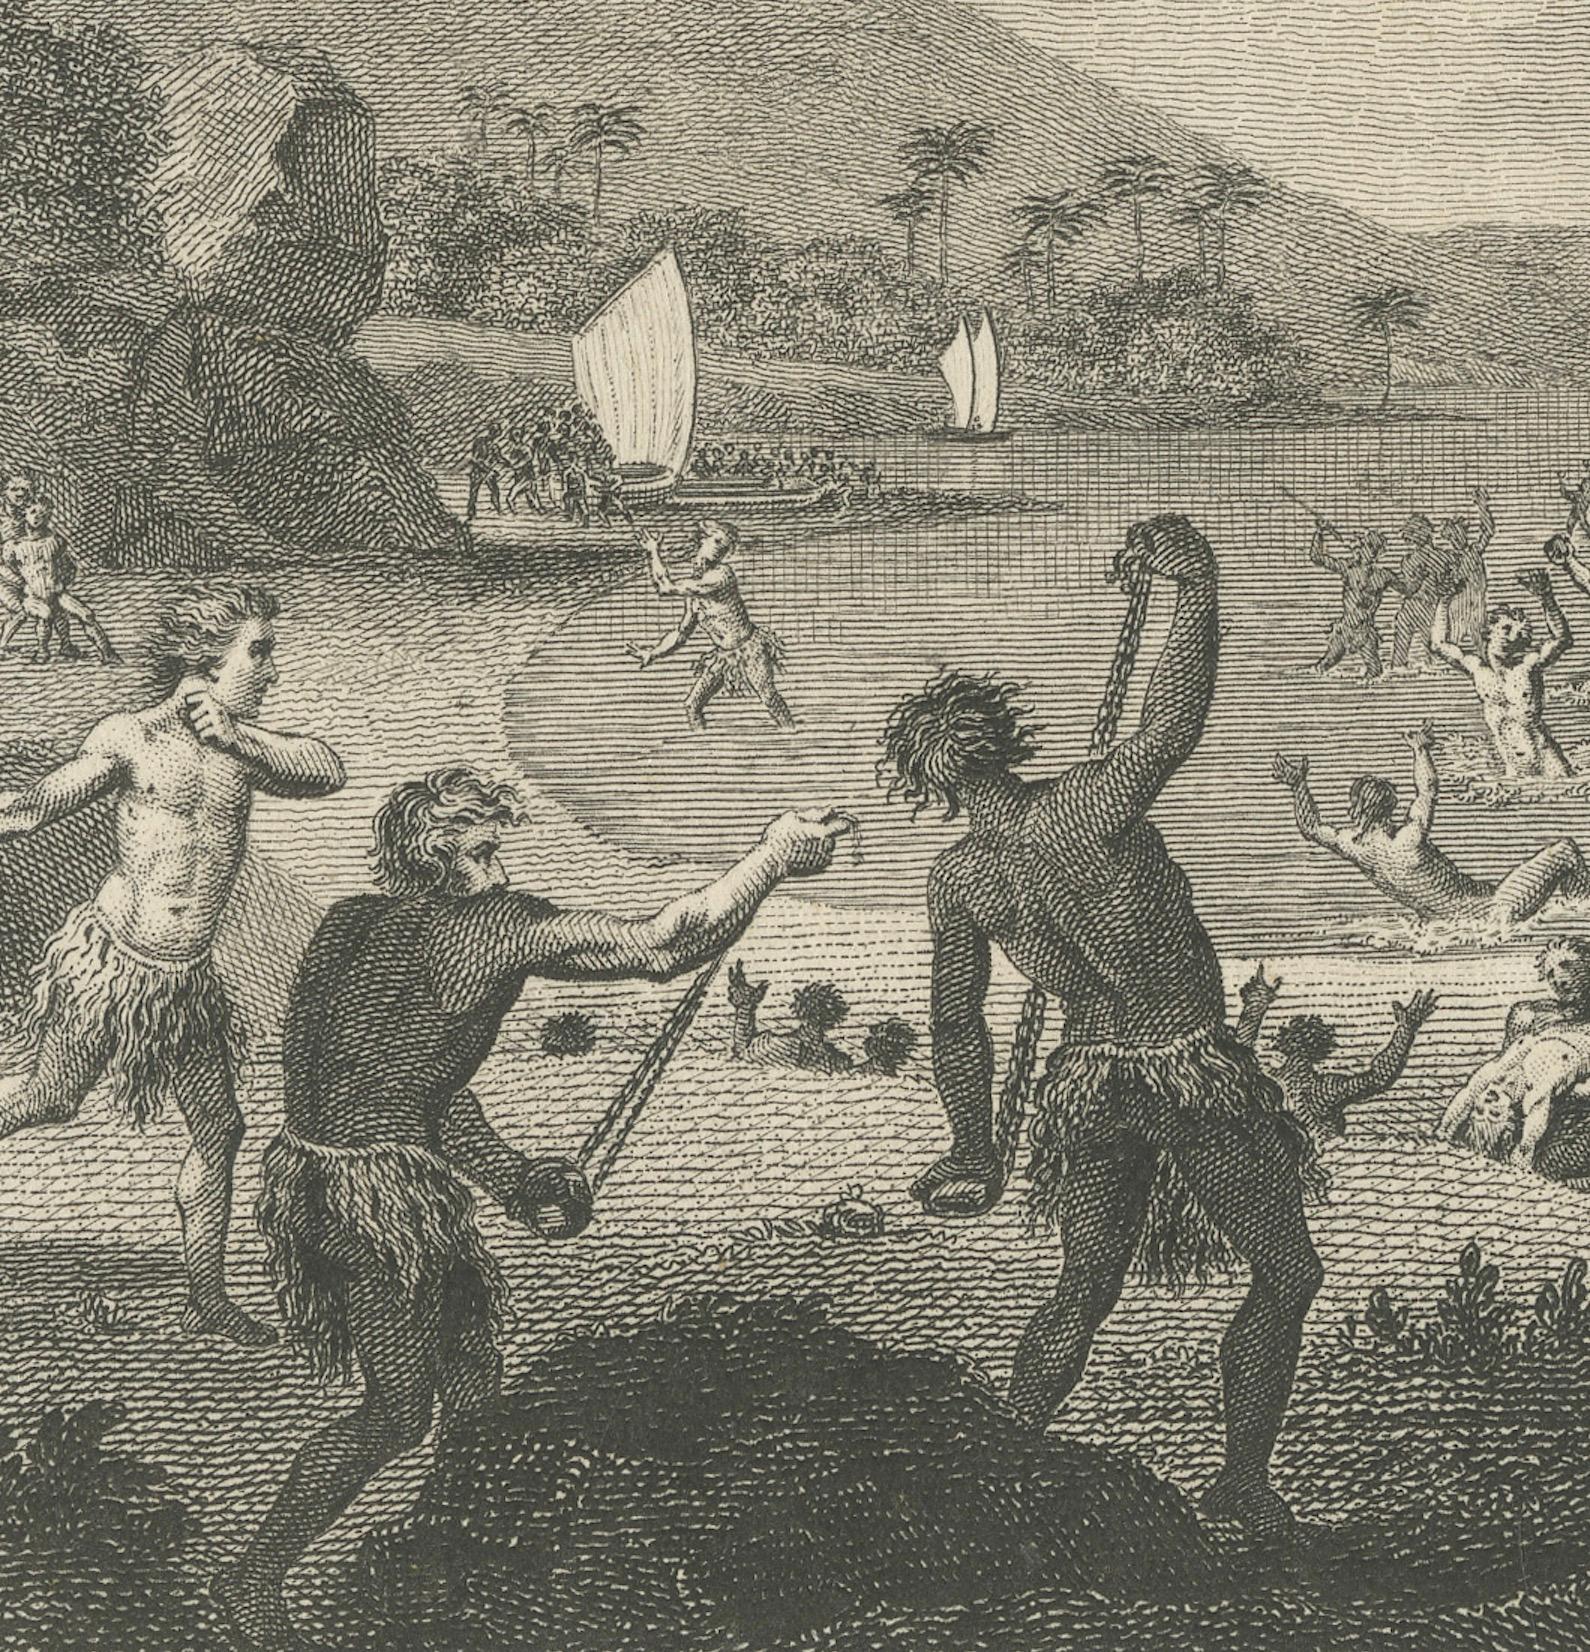 Engraved Confrontation and Culture: Samoan Warrior Engagement, Published in 1820 For Sale